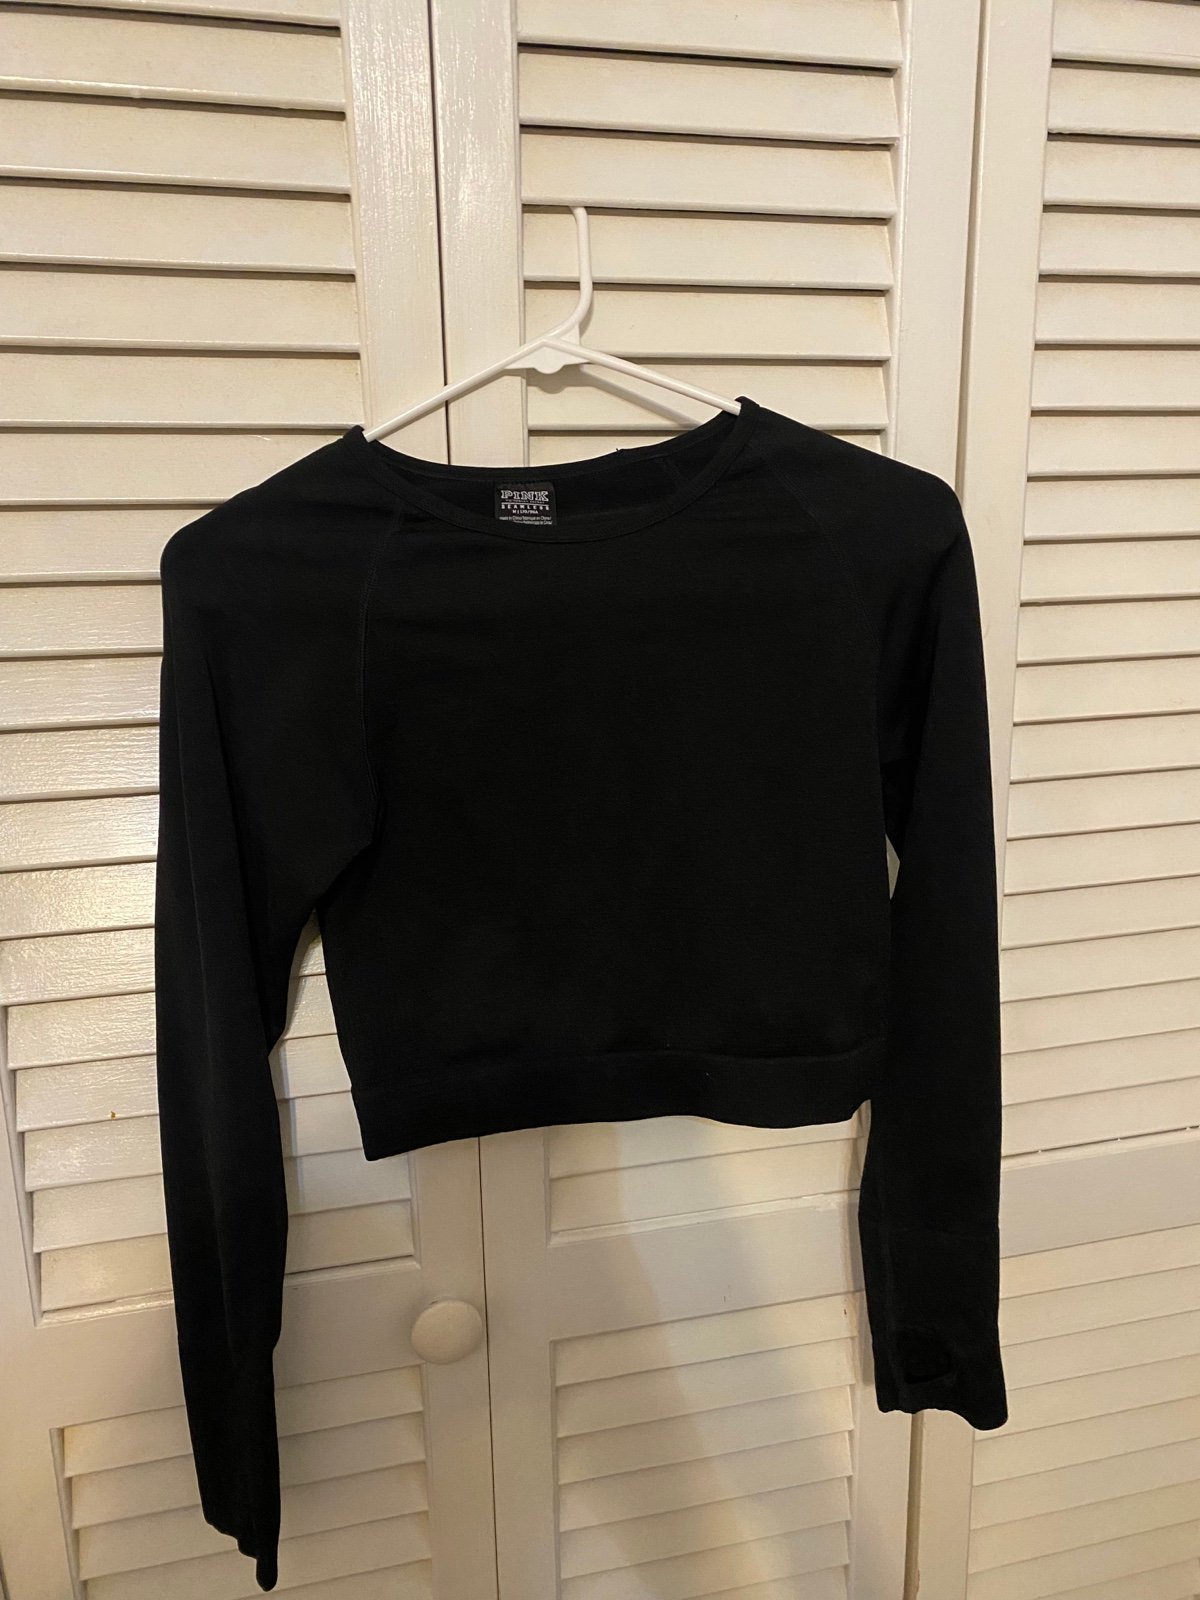 Special offer  Long Sleeve Crop top izHn64pX8 Buying Ch